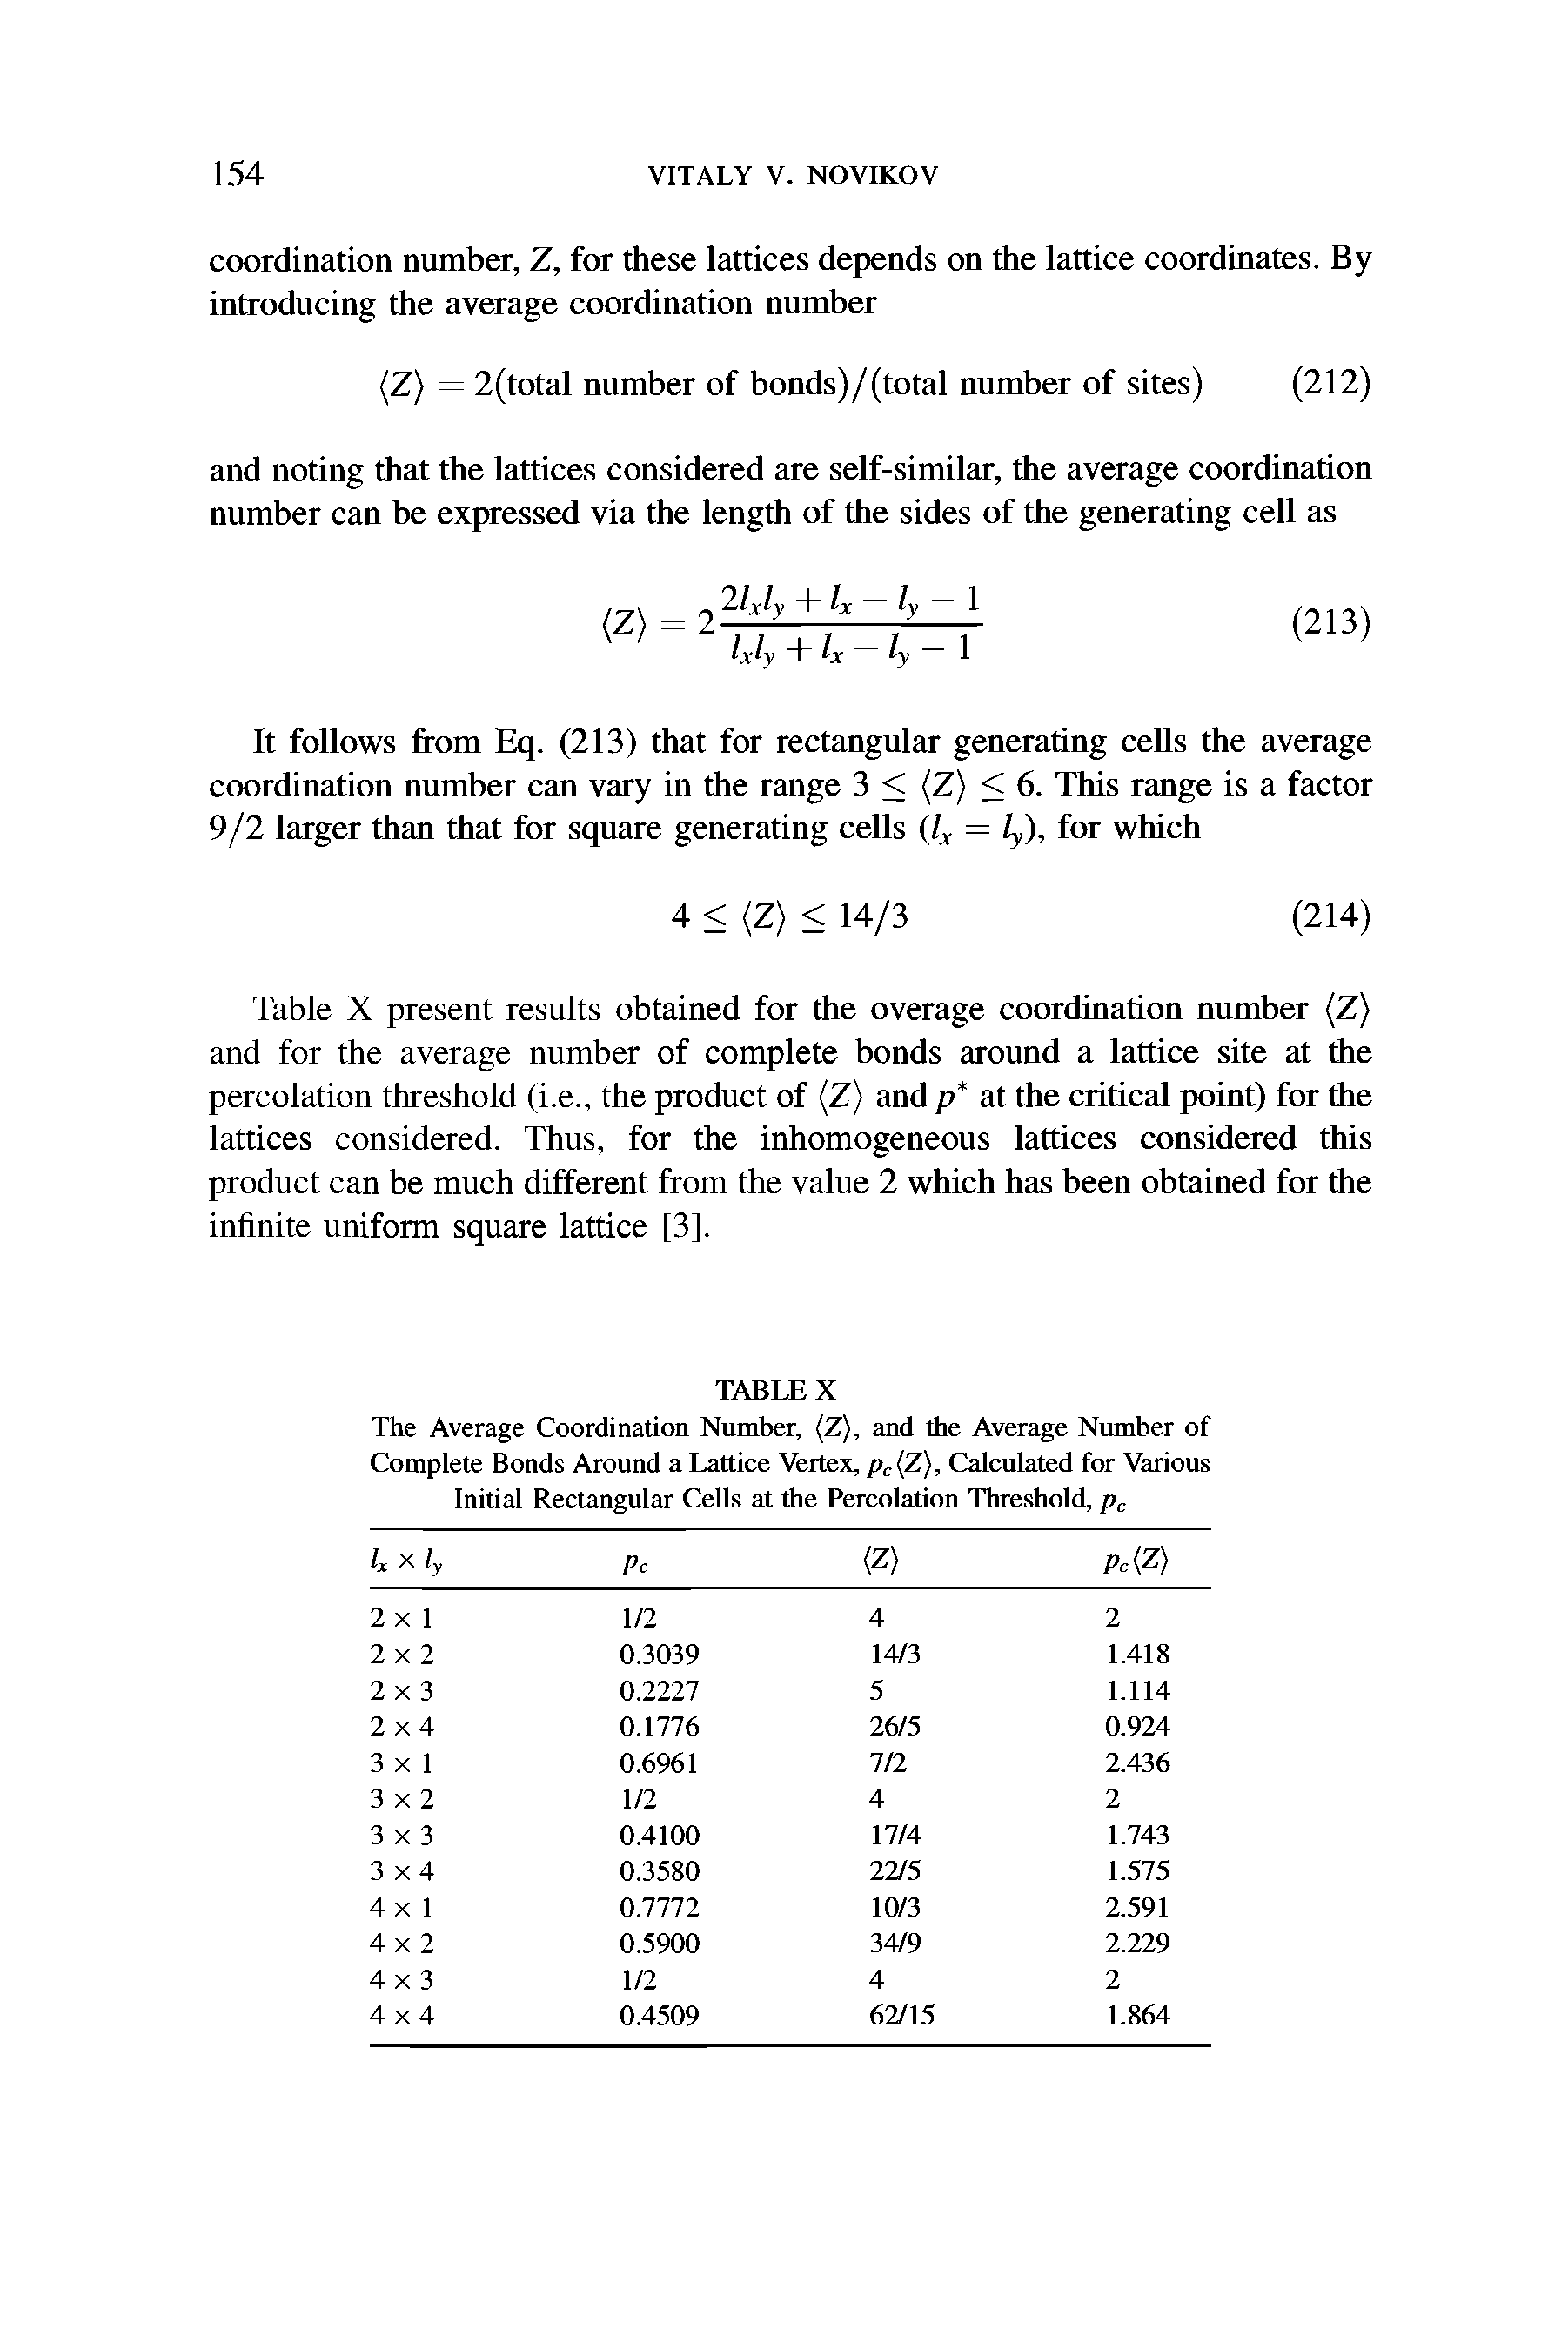 Table X present results obtained for the overage coordination number (Z) and for the average number of complete bonds around a lattice site at the percolation threshold (i.e., the product of (Z) and p at the critical point) for the lattices considered. Thus, for the inhomogeneous lattices considered this product can be much different from the value 2 which has been obtained for the infinite uniform square lattice [3].